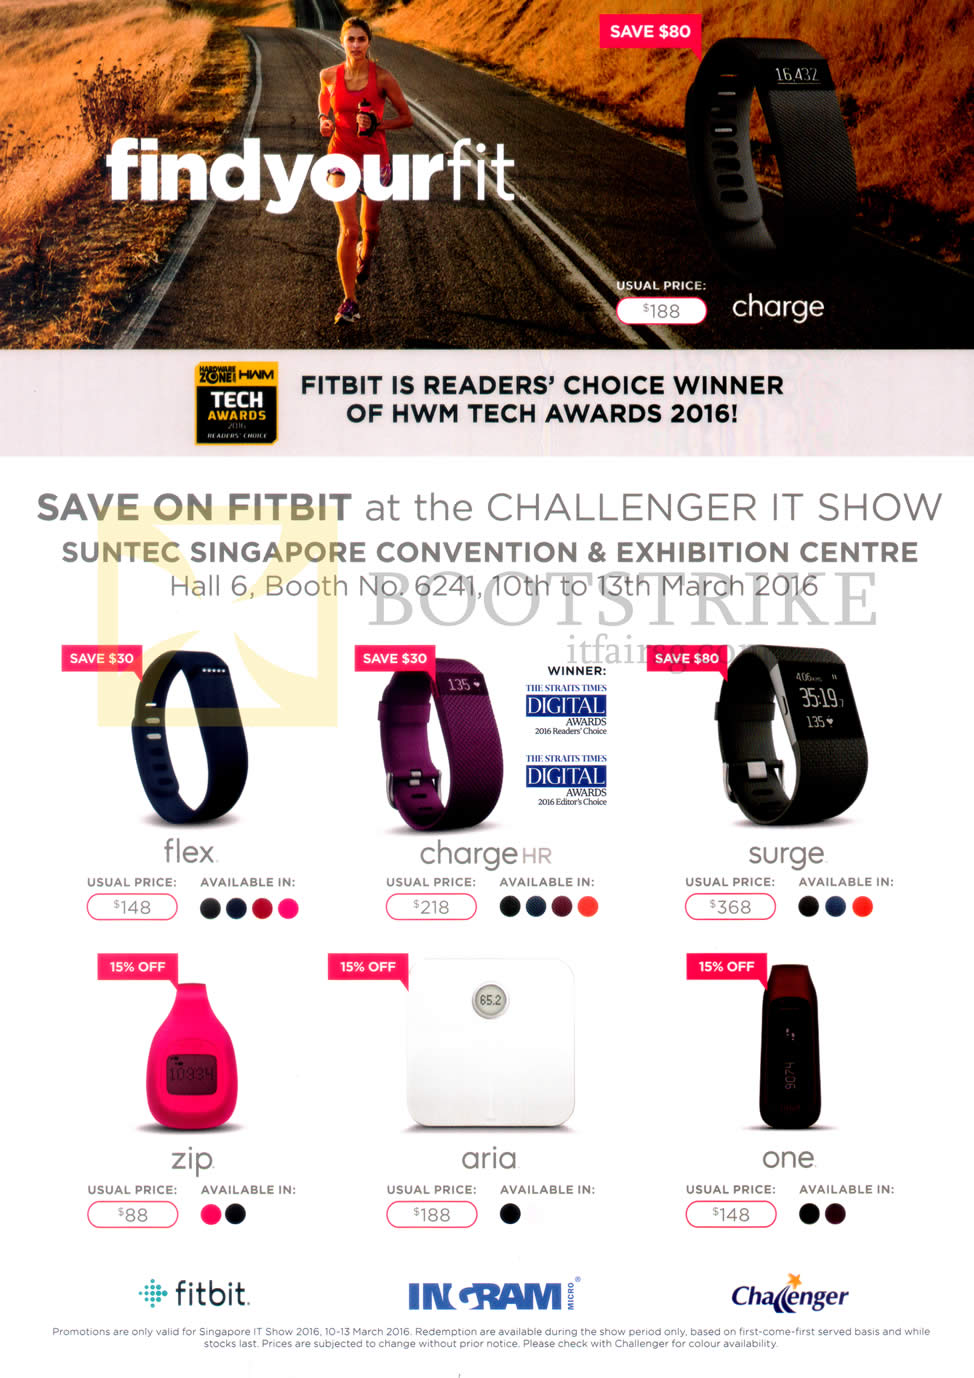 IT SHOW 2016 price list image brochure of Challenger Fitibit Flex, Charge HR, Surge, Zip, Aria, One